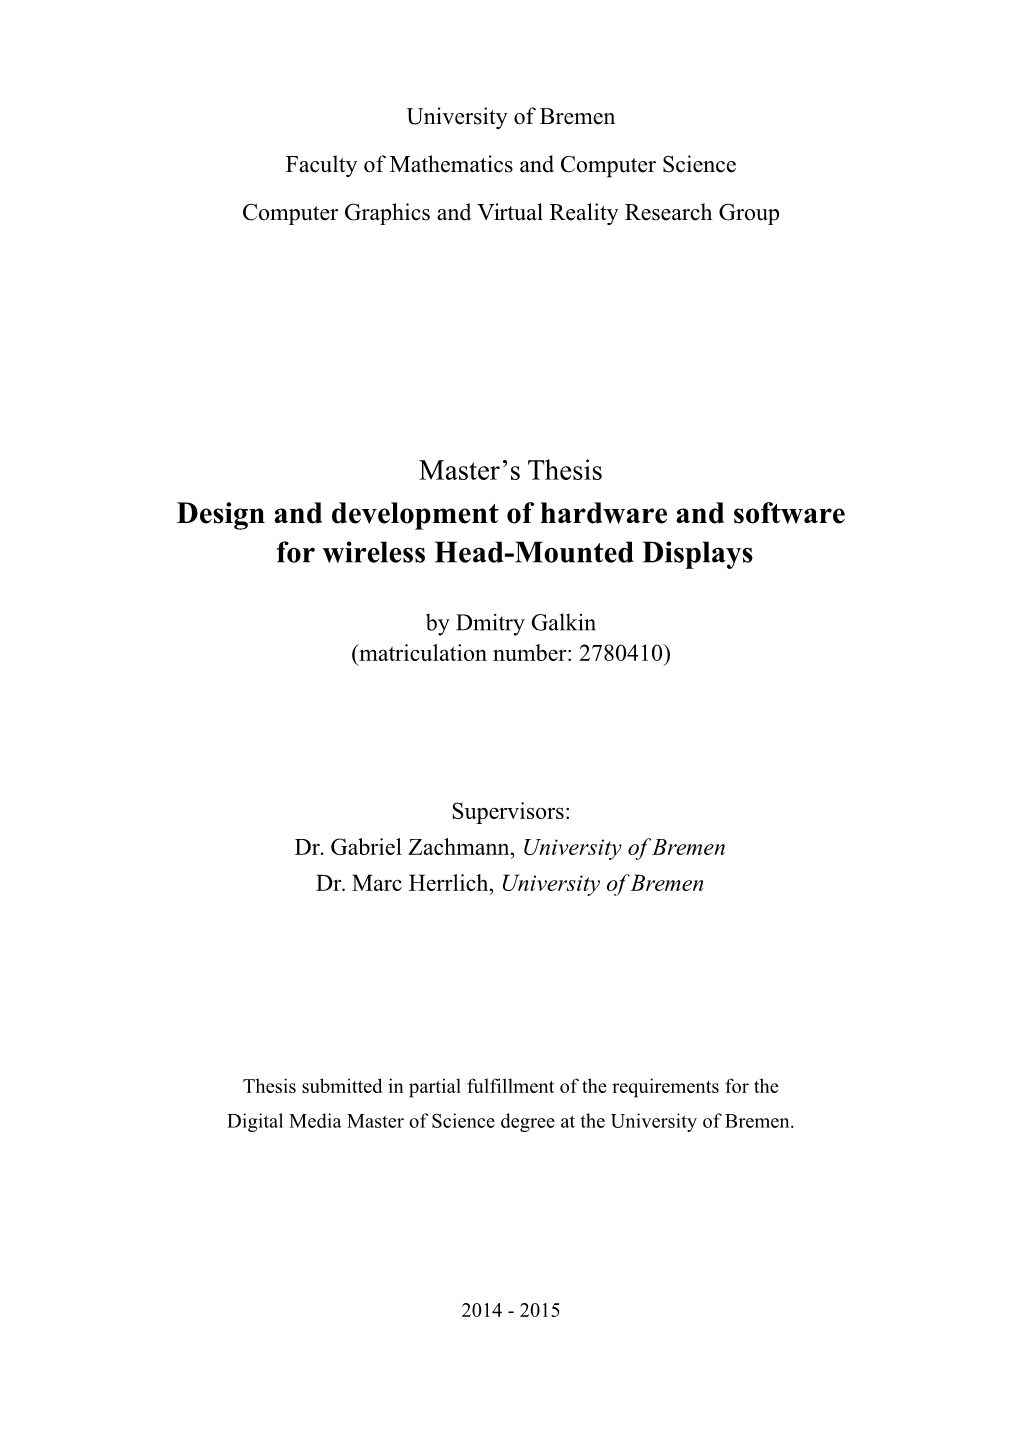 Design and Development of Hardware and Software for Wireless Head-Mounted Displays